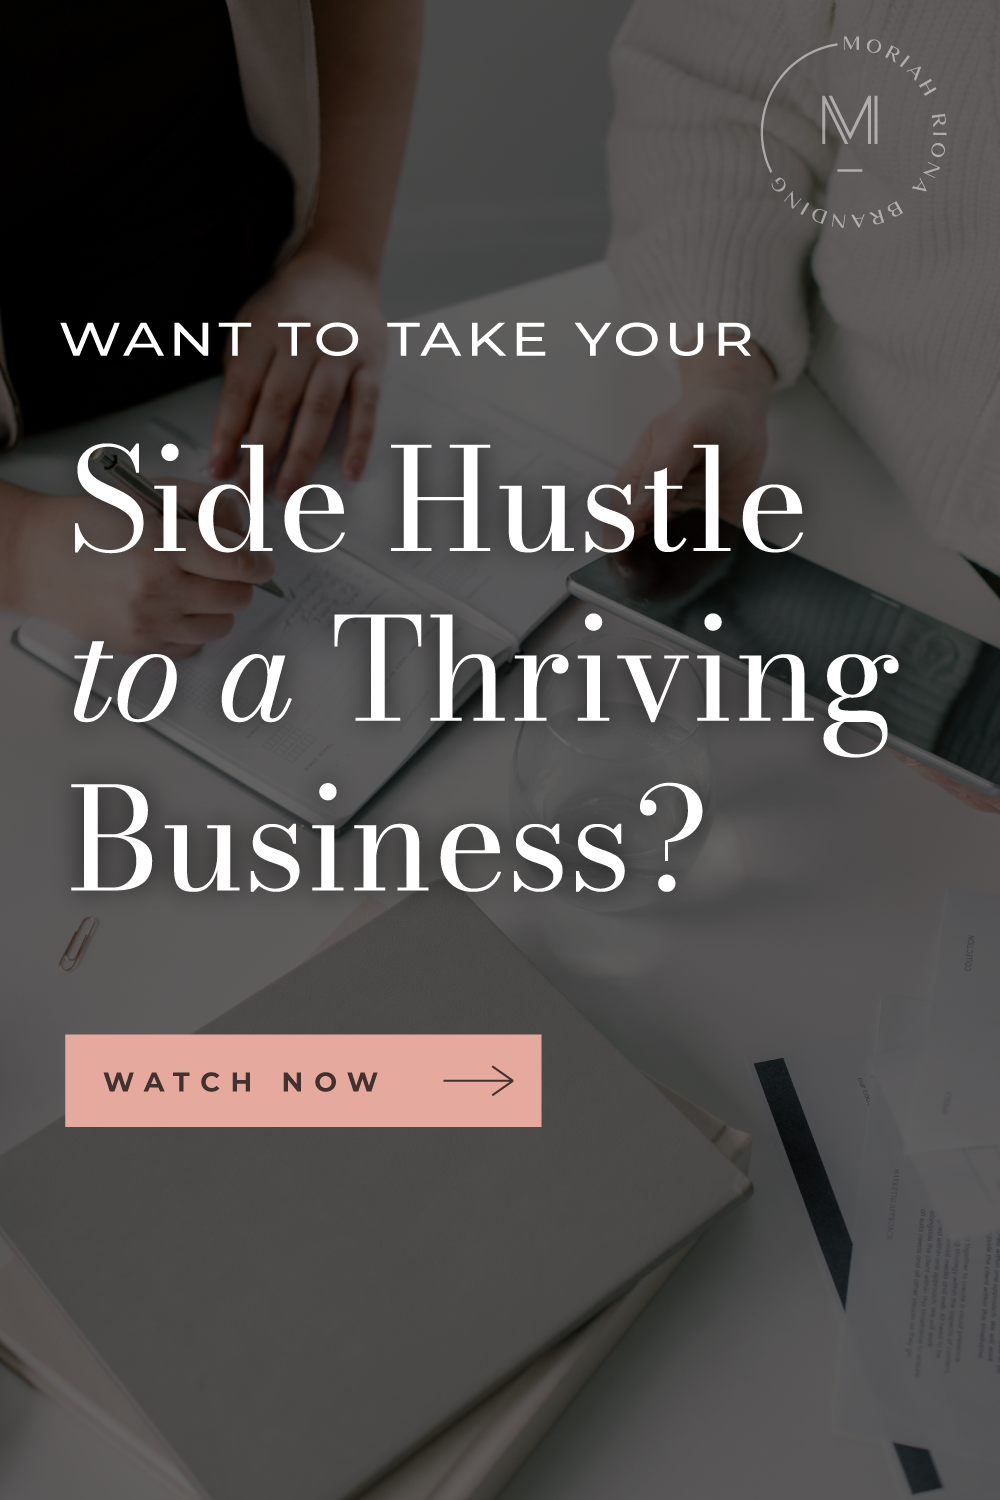 Wondering how to grow your business from a part-time passion to a full-time life coaching success? Then this blog post is for you! I’m sharing my top life coach tips for growing your online coaching business—so you can work smarter, not harder. #luxurybrand #lifecoach #lifecoaching #entrepreneurtips